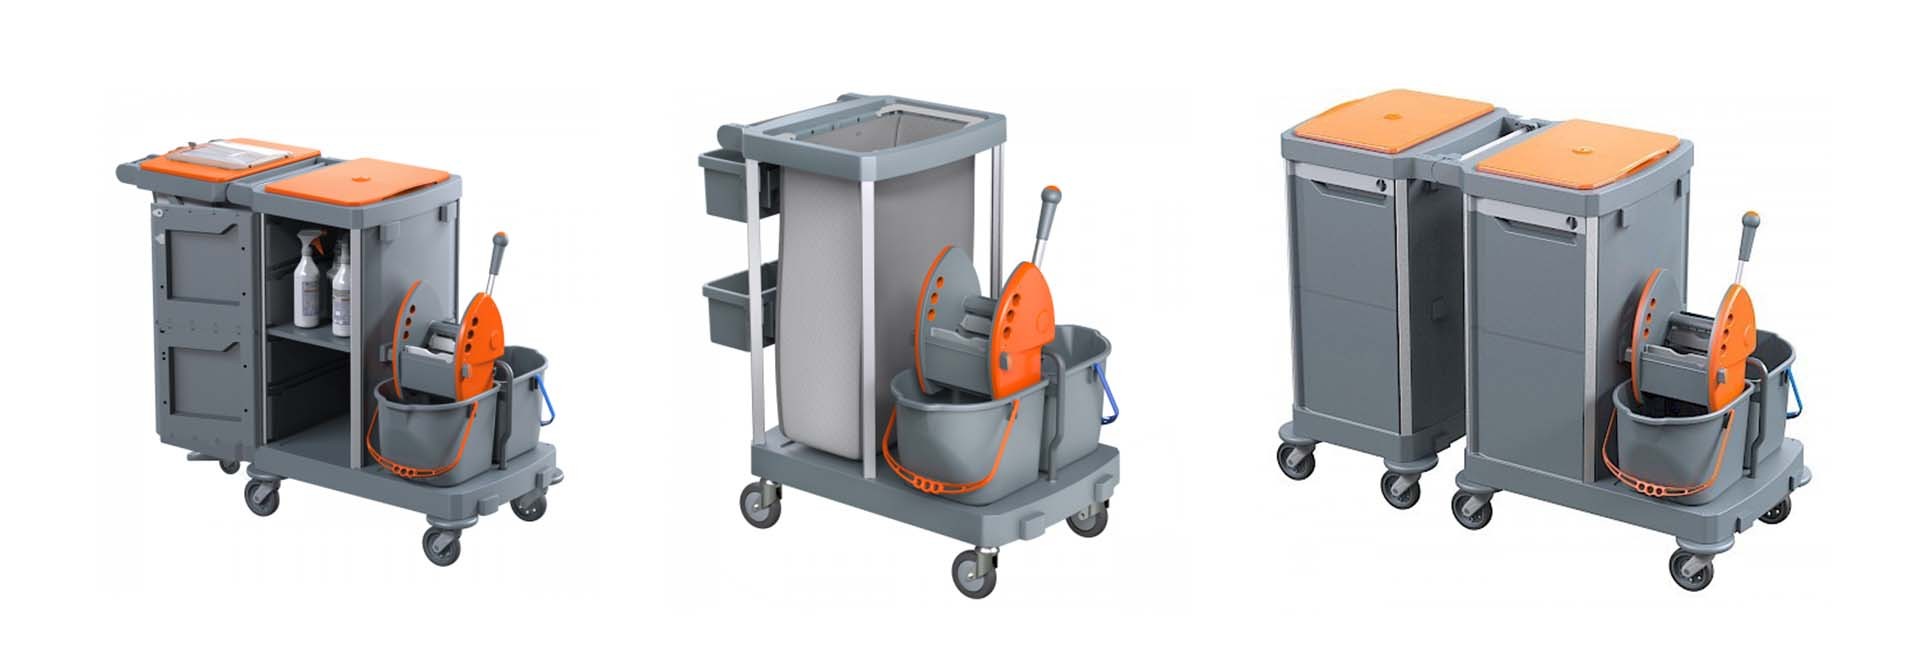 Multi Purpose cleaning Trolley